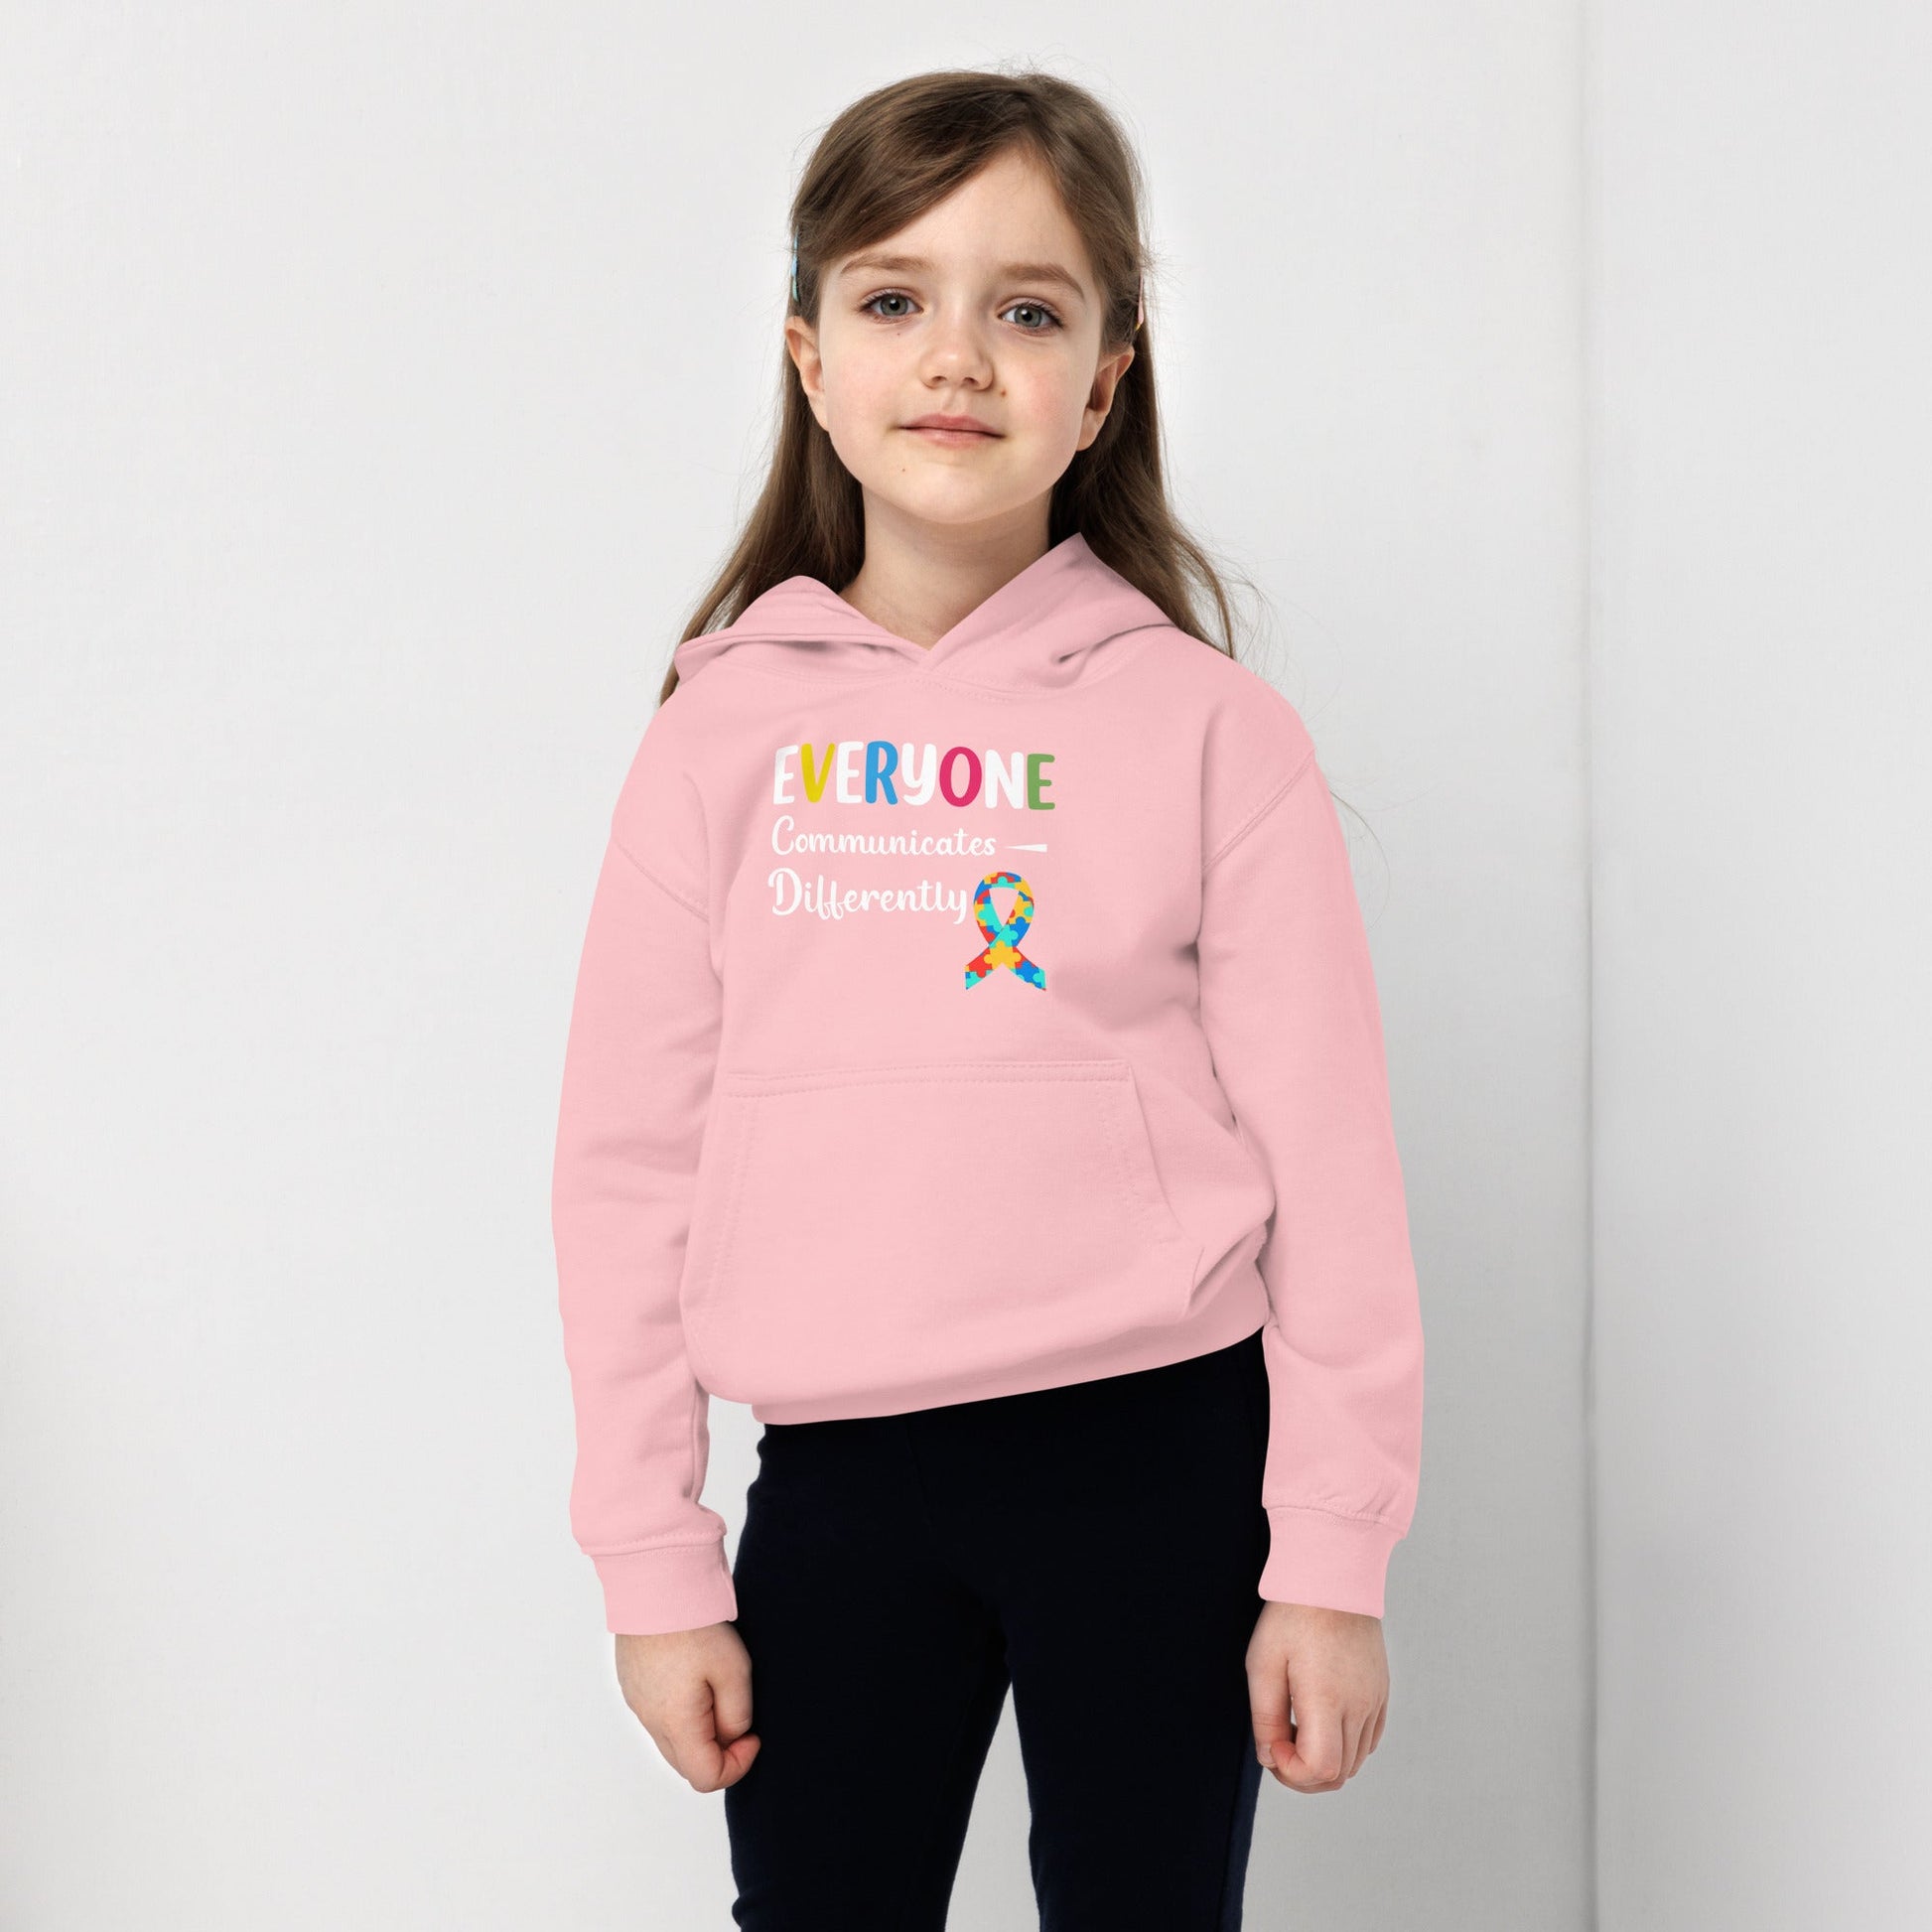 Everyone Communicates Differently Kids Hoodie - Uniquely Included